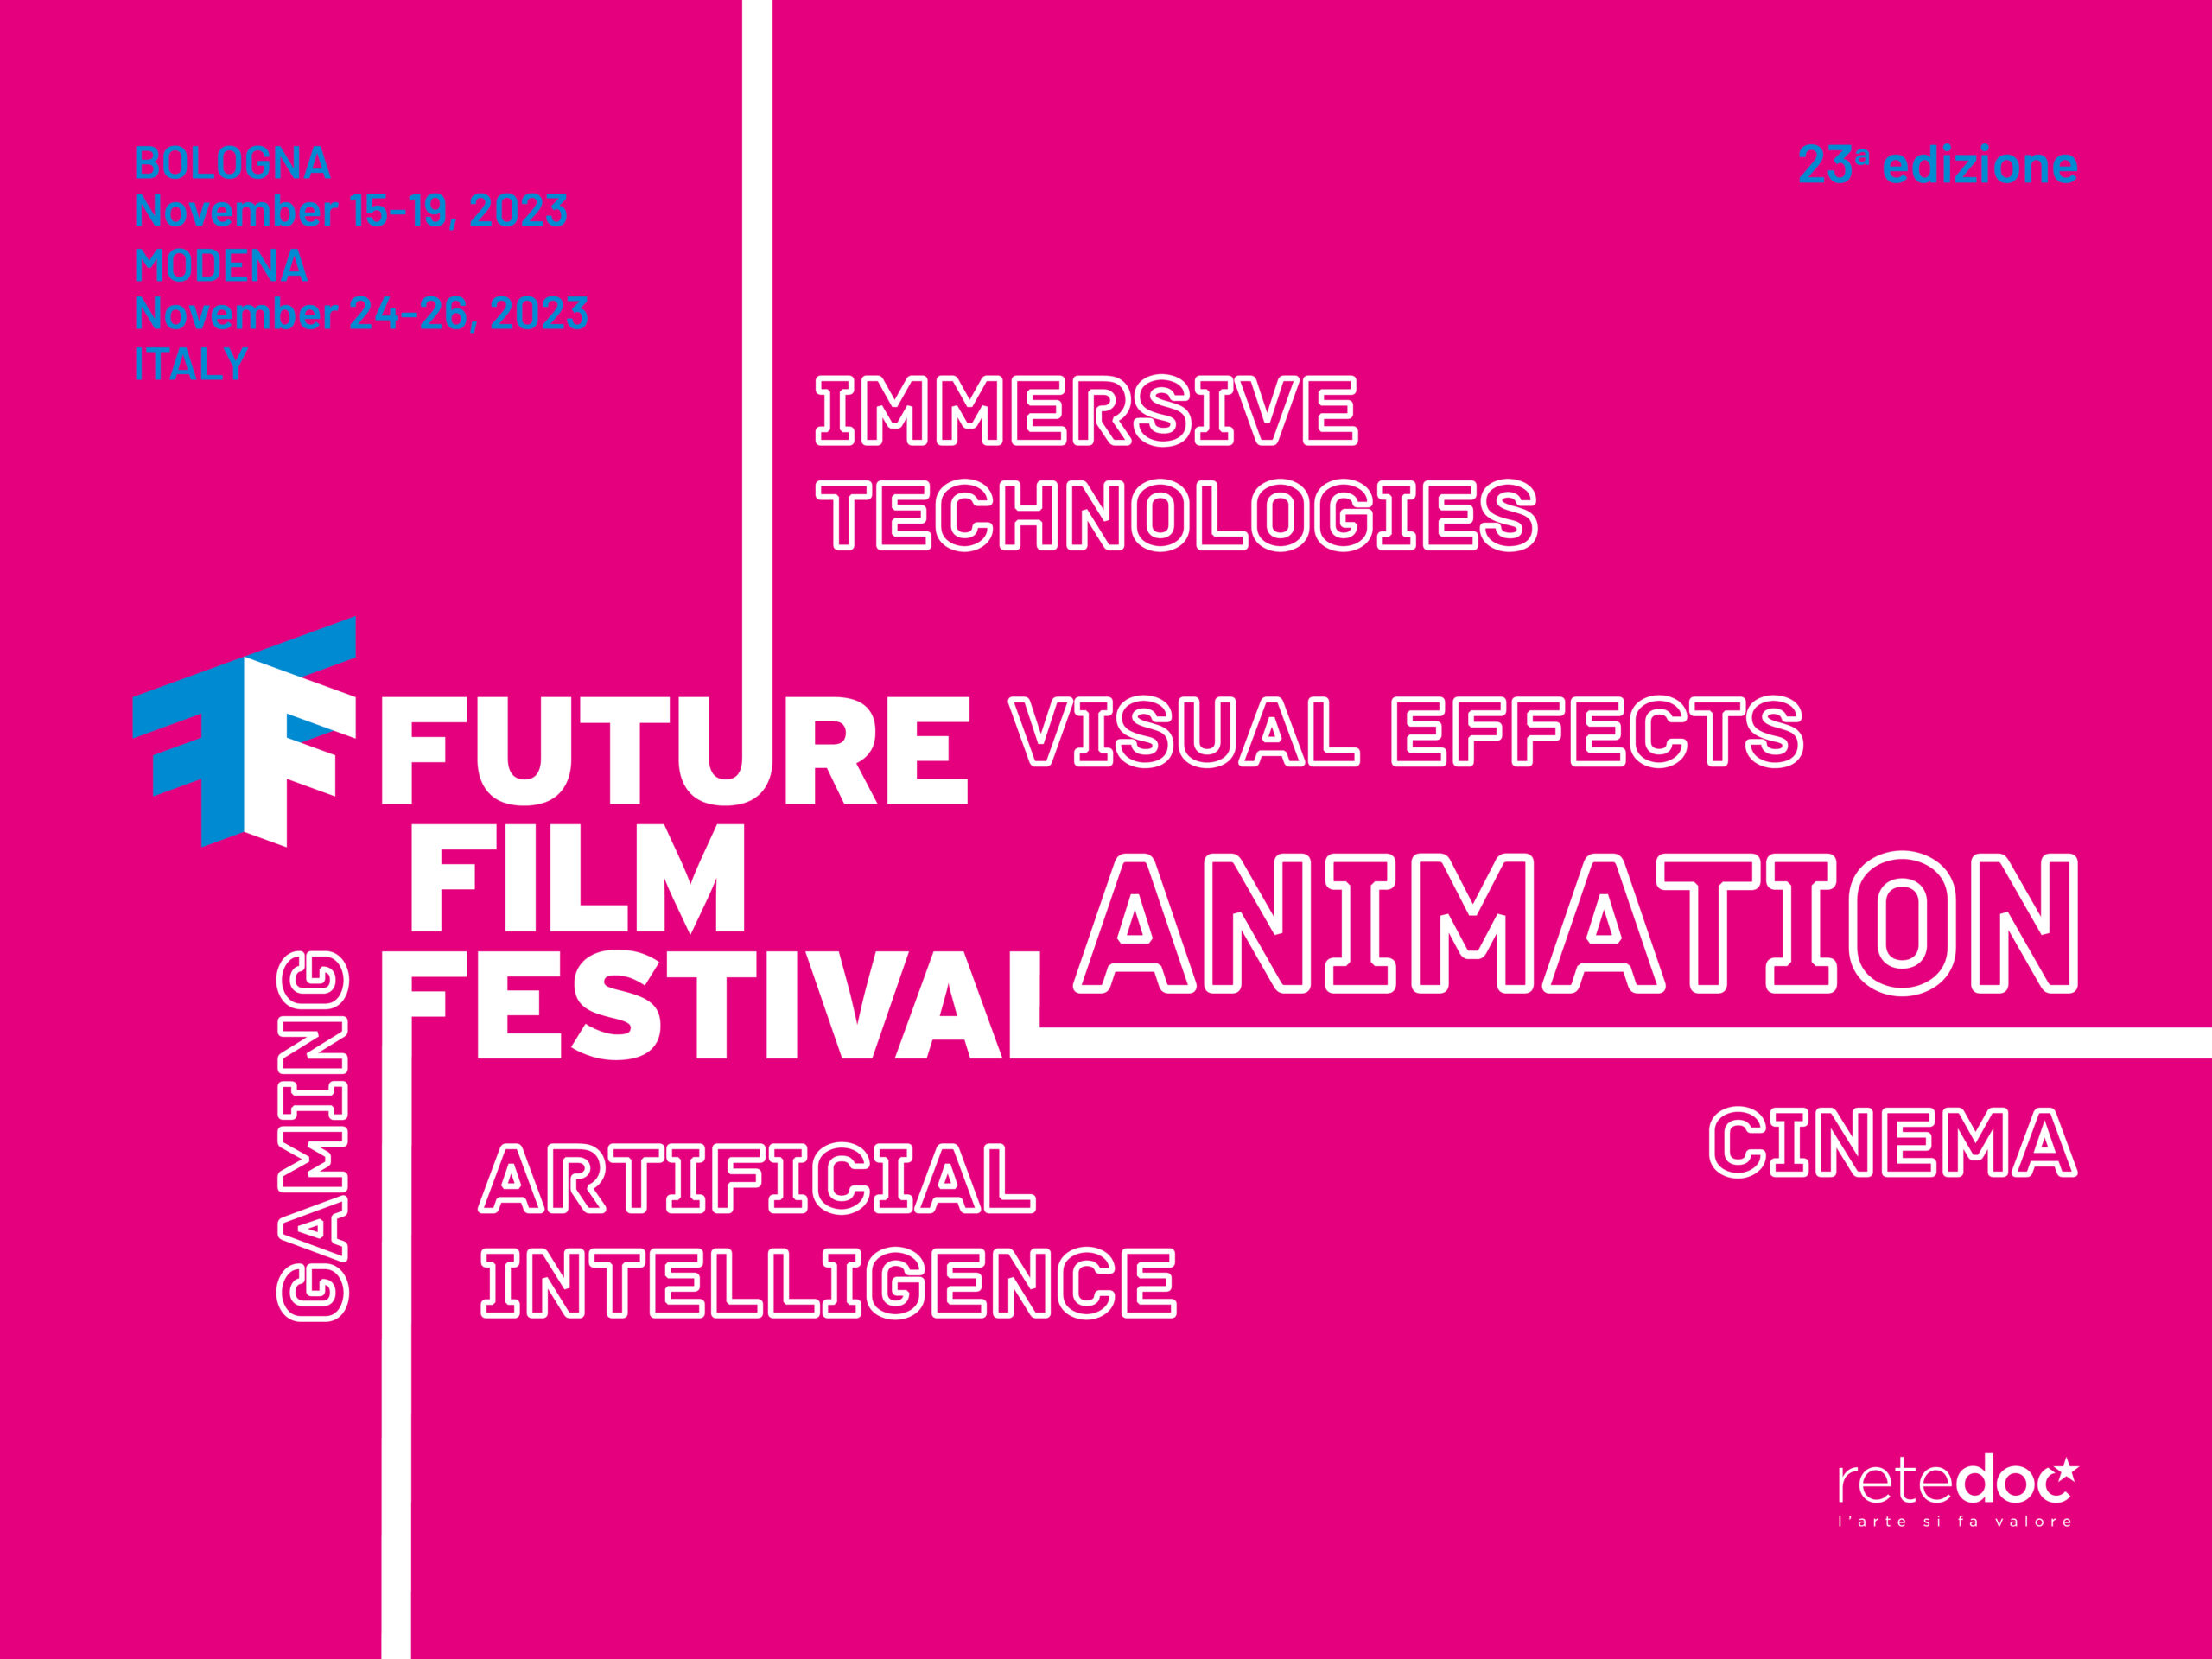 15-19 November in Bologna, 24-26 November in Modena: dates and announcements for the 23rd edition of the Future Film Festival